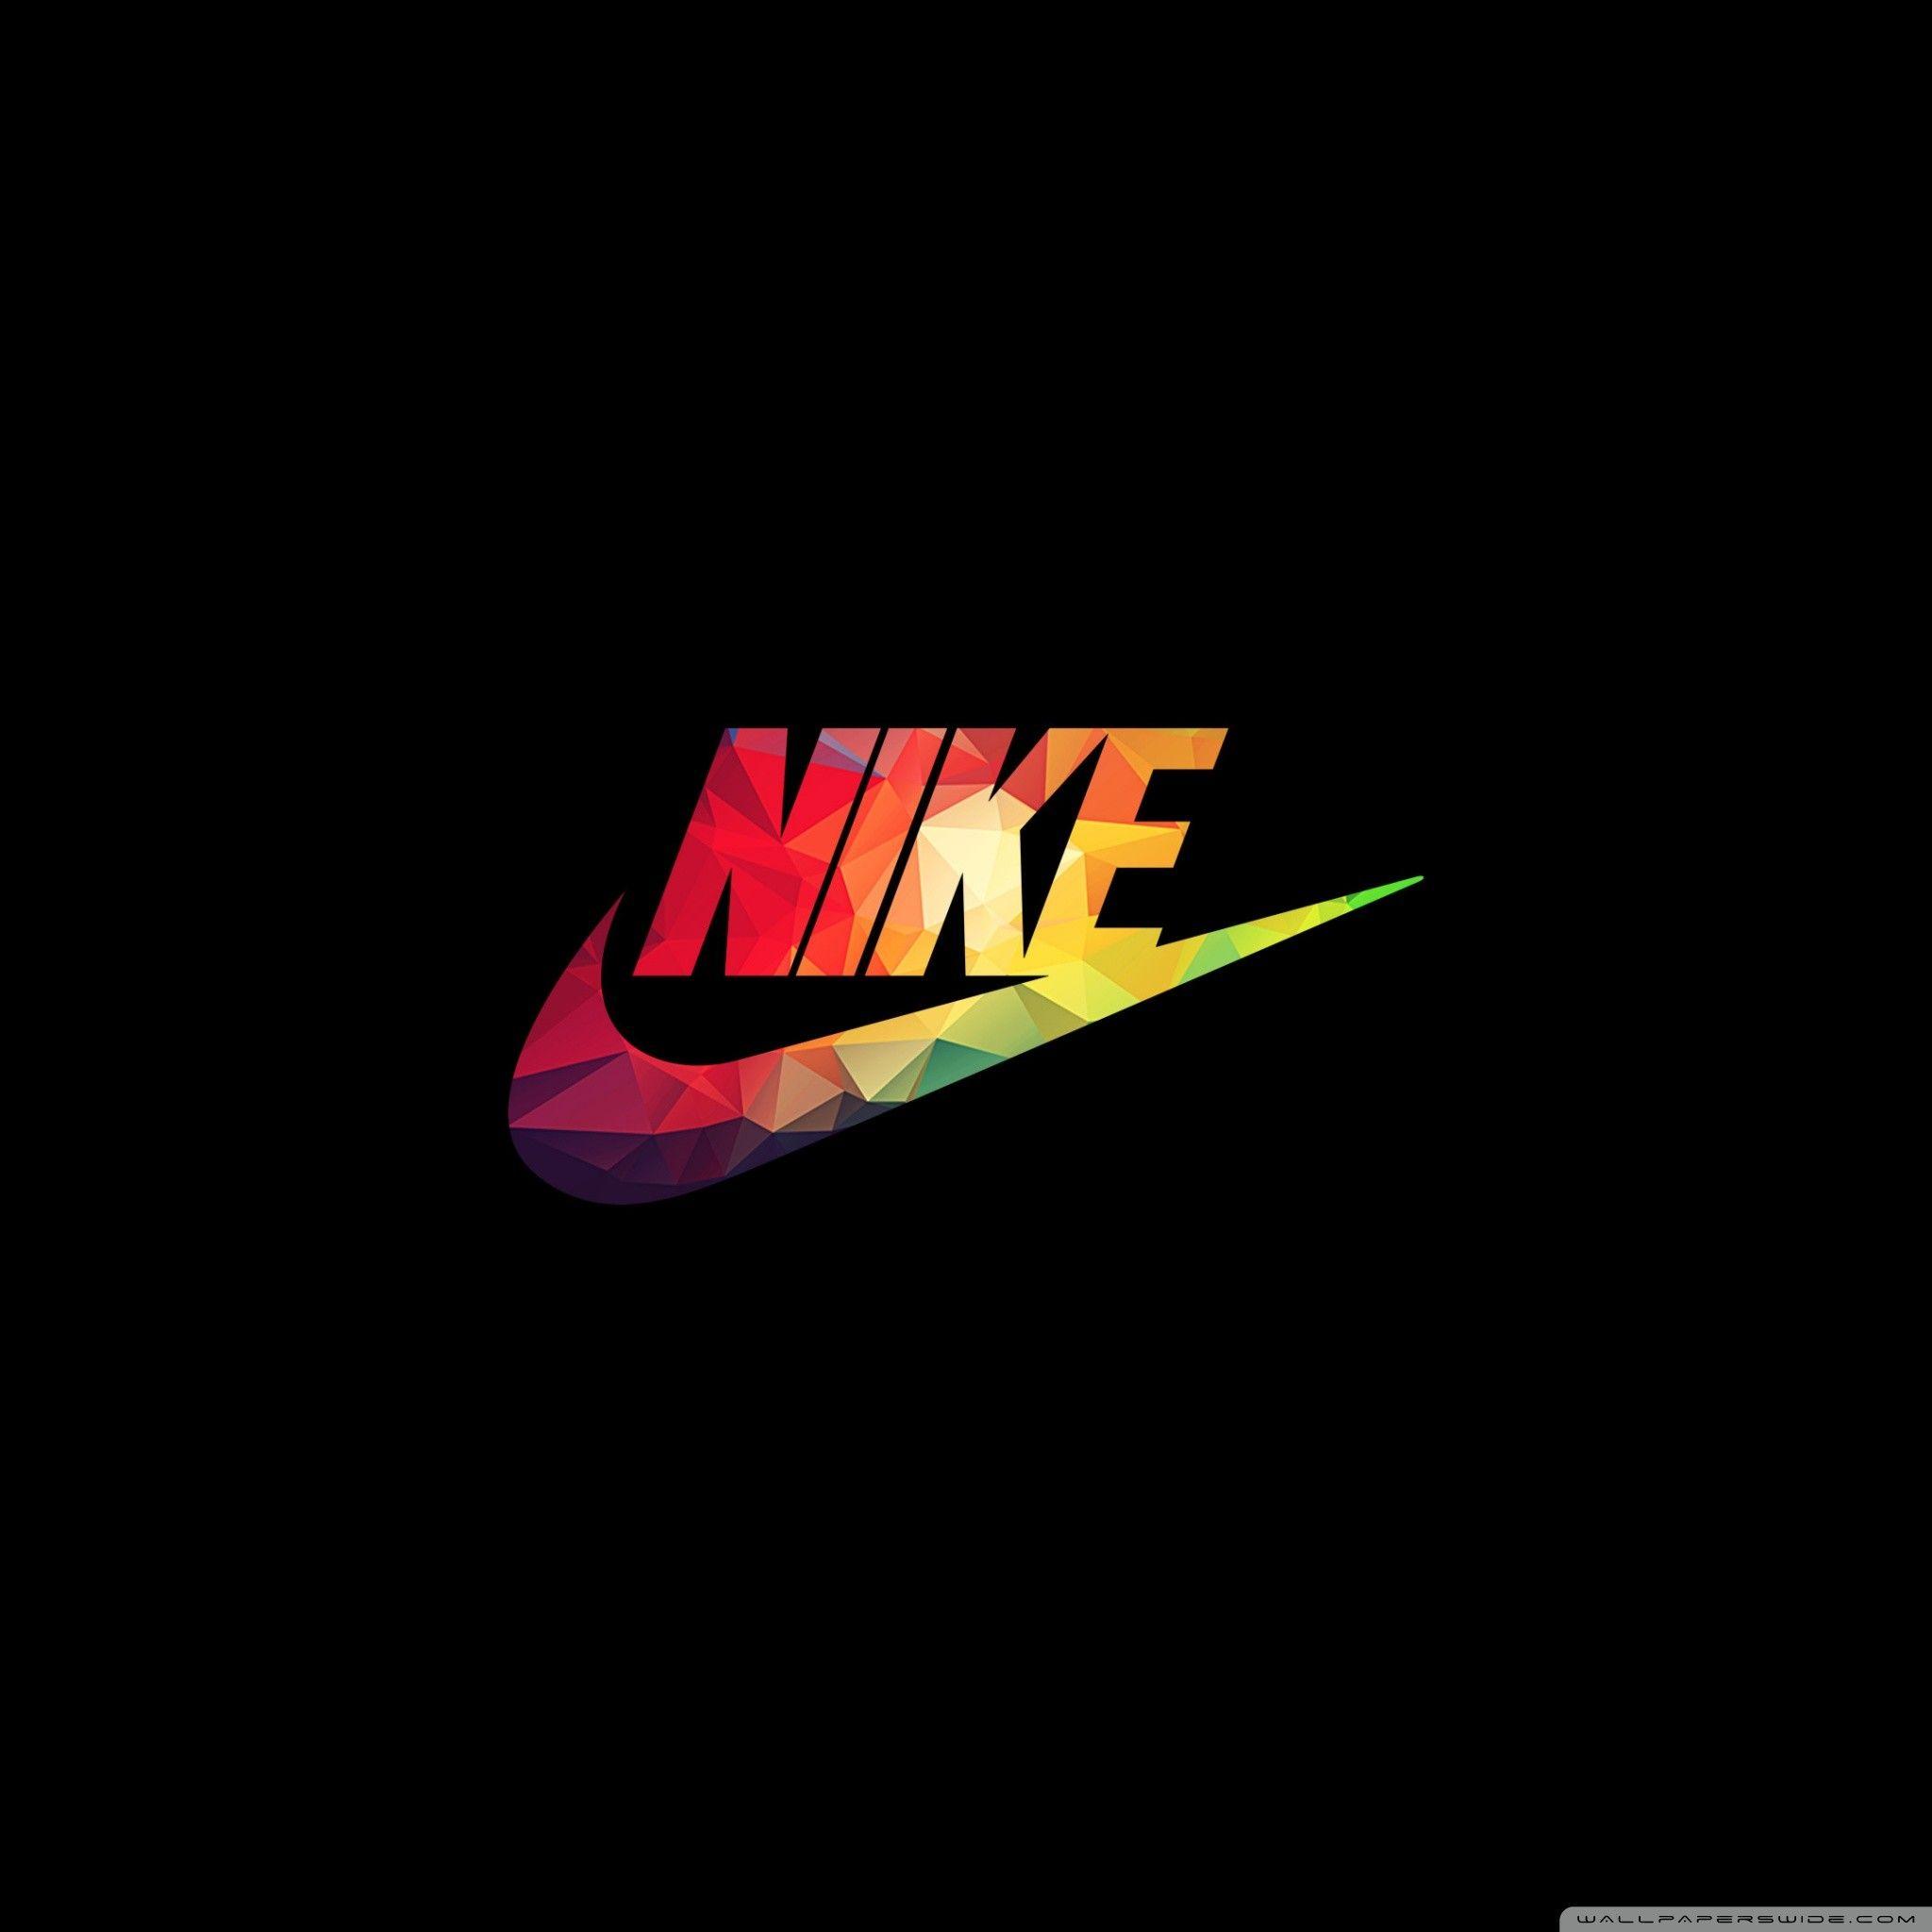 nike wallpaper for iphone hd